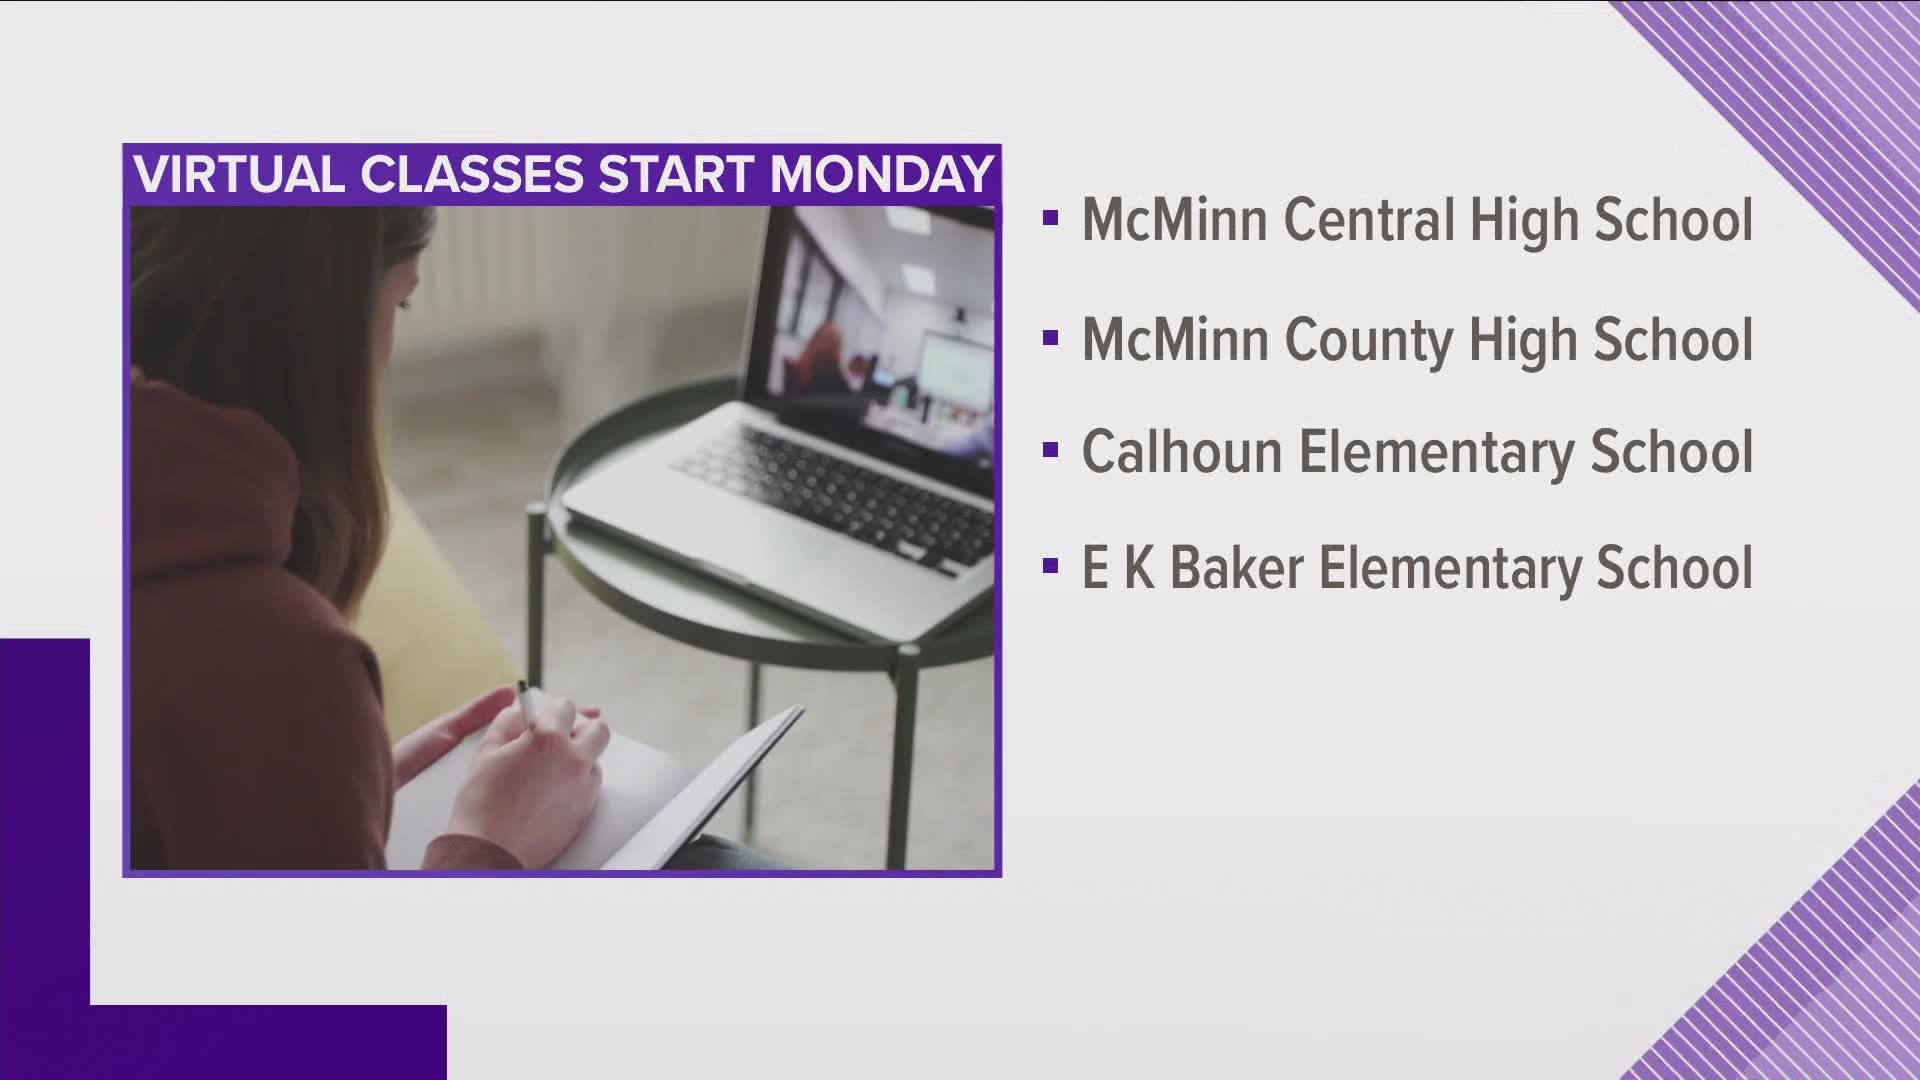 The school district says McMinn Central High School, McMinn County High School, Calhoun Elementary School and EK Baker Elementary School will all be virtual.